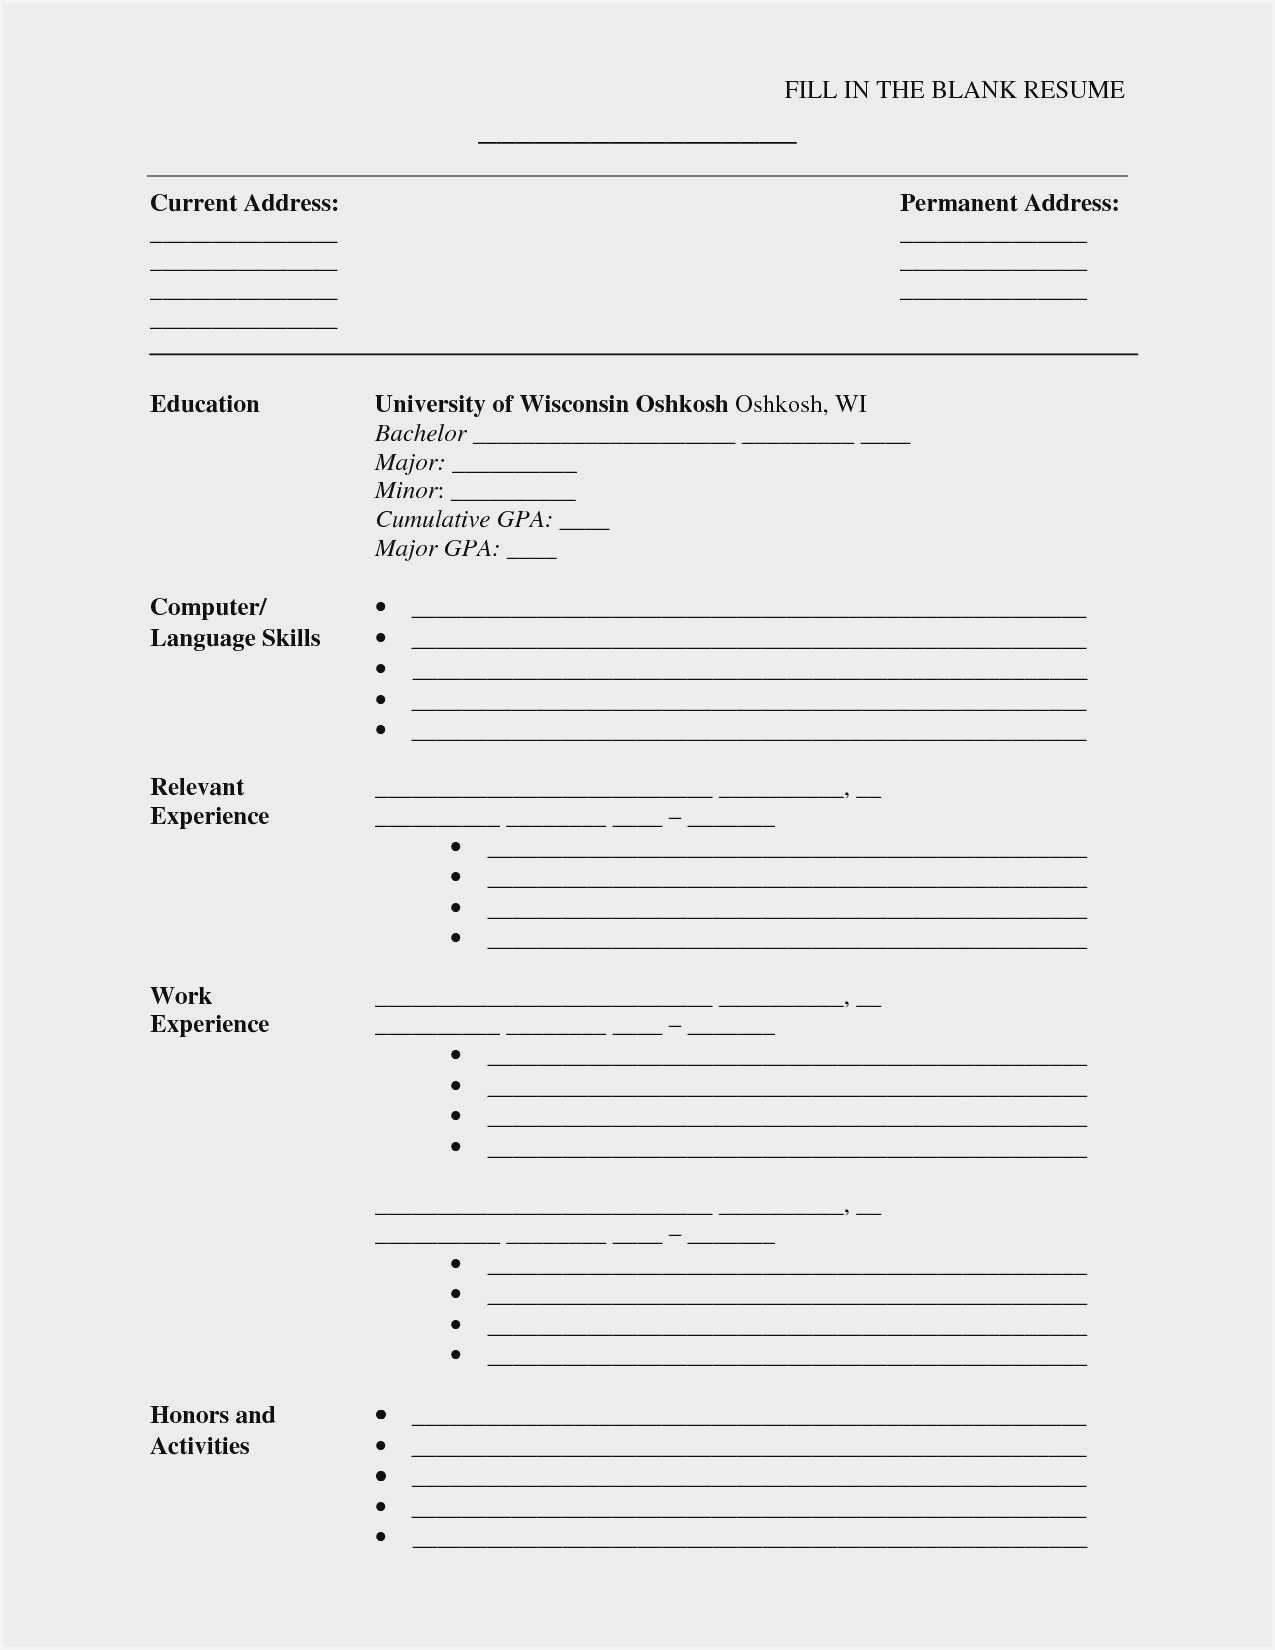 Blank Cv Format Word Download – Resume : Resume Sample #3945 With Blank Resume Templates For Microsoft Word